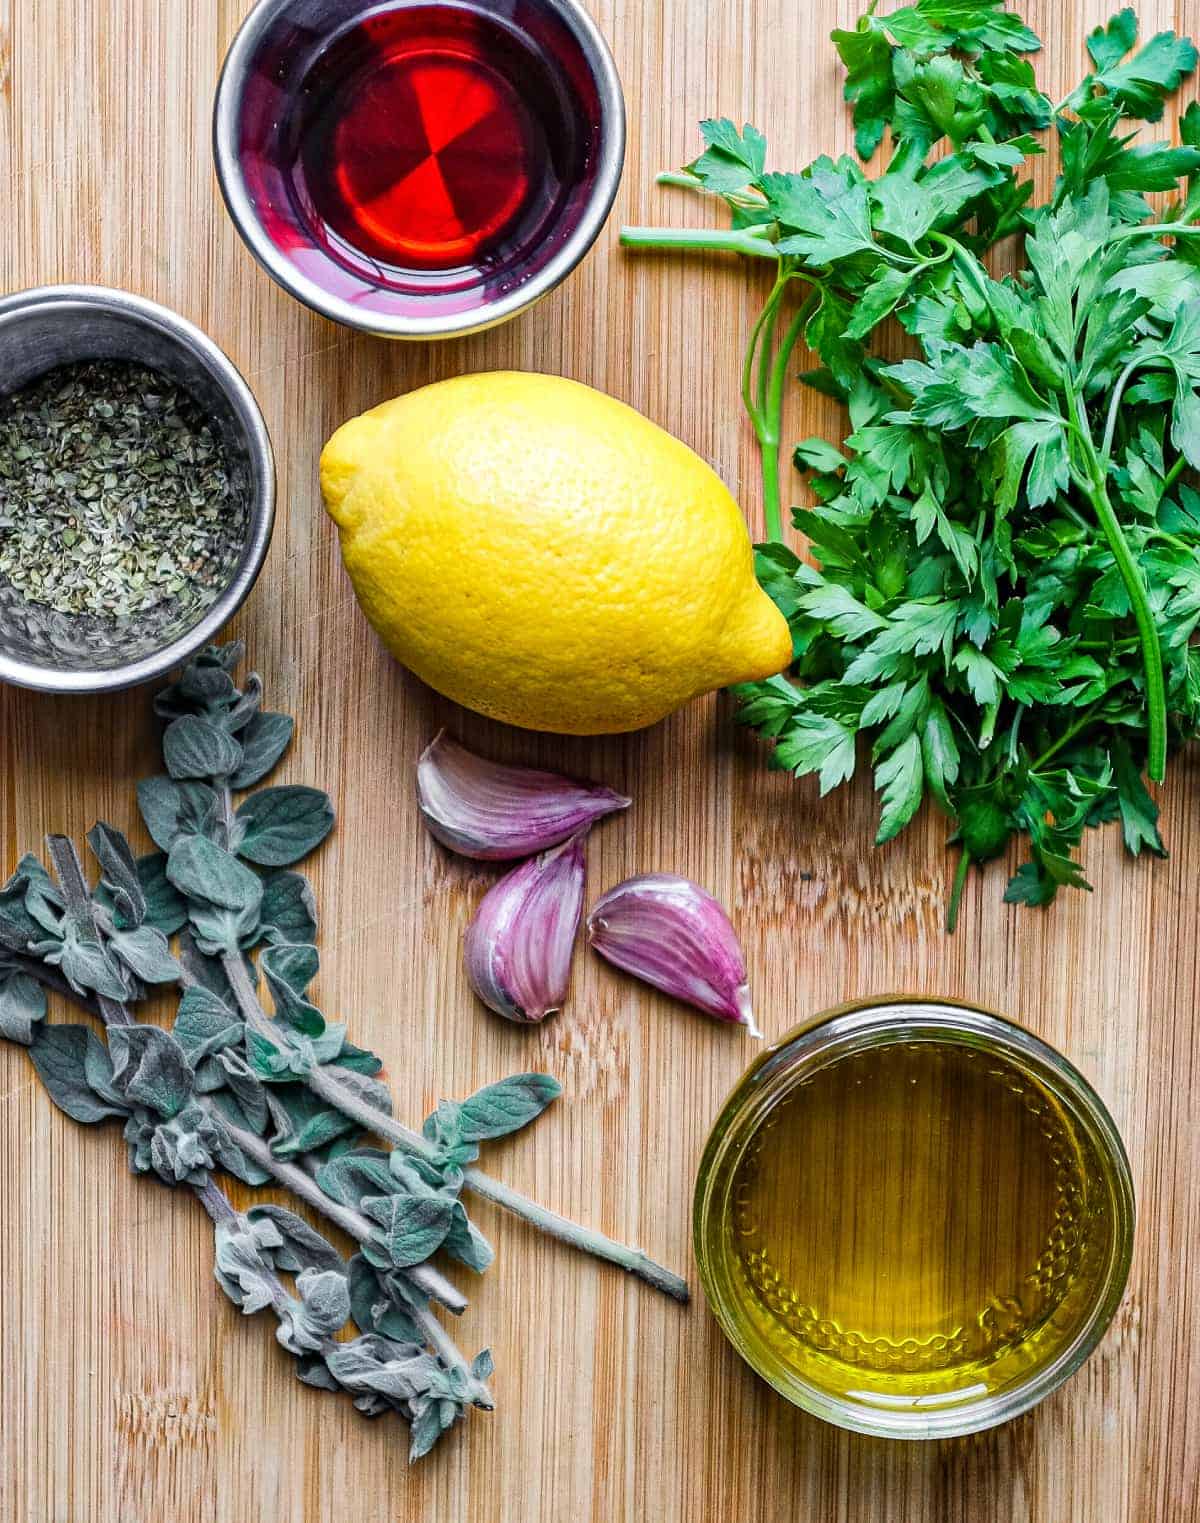 The ingredients for chimichurri sauce, including lemon, parsley, oregano, red wine vinegar, garlic and olive oil.